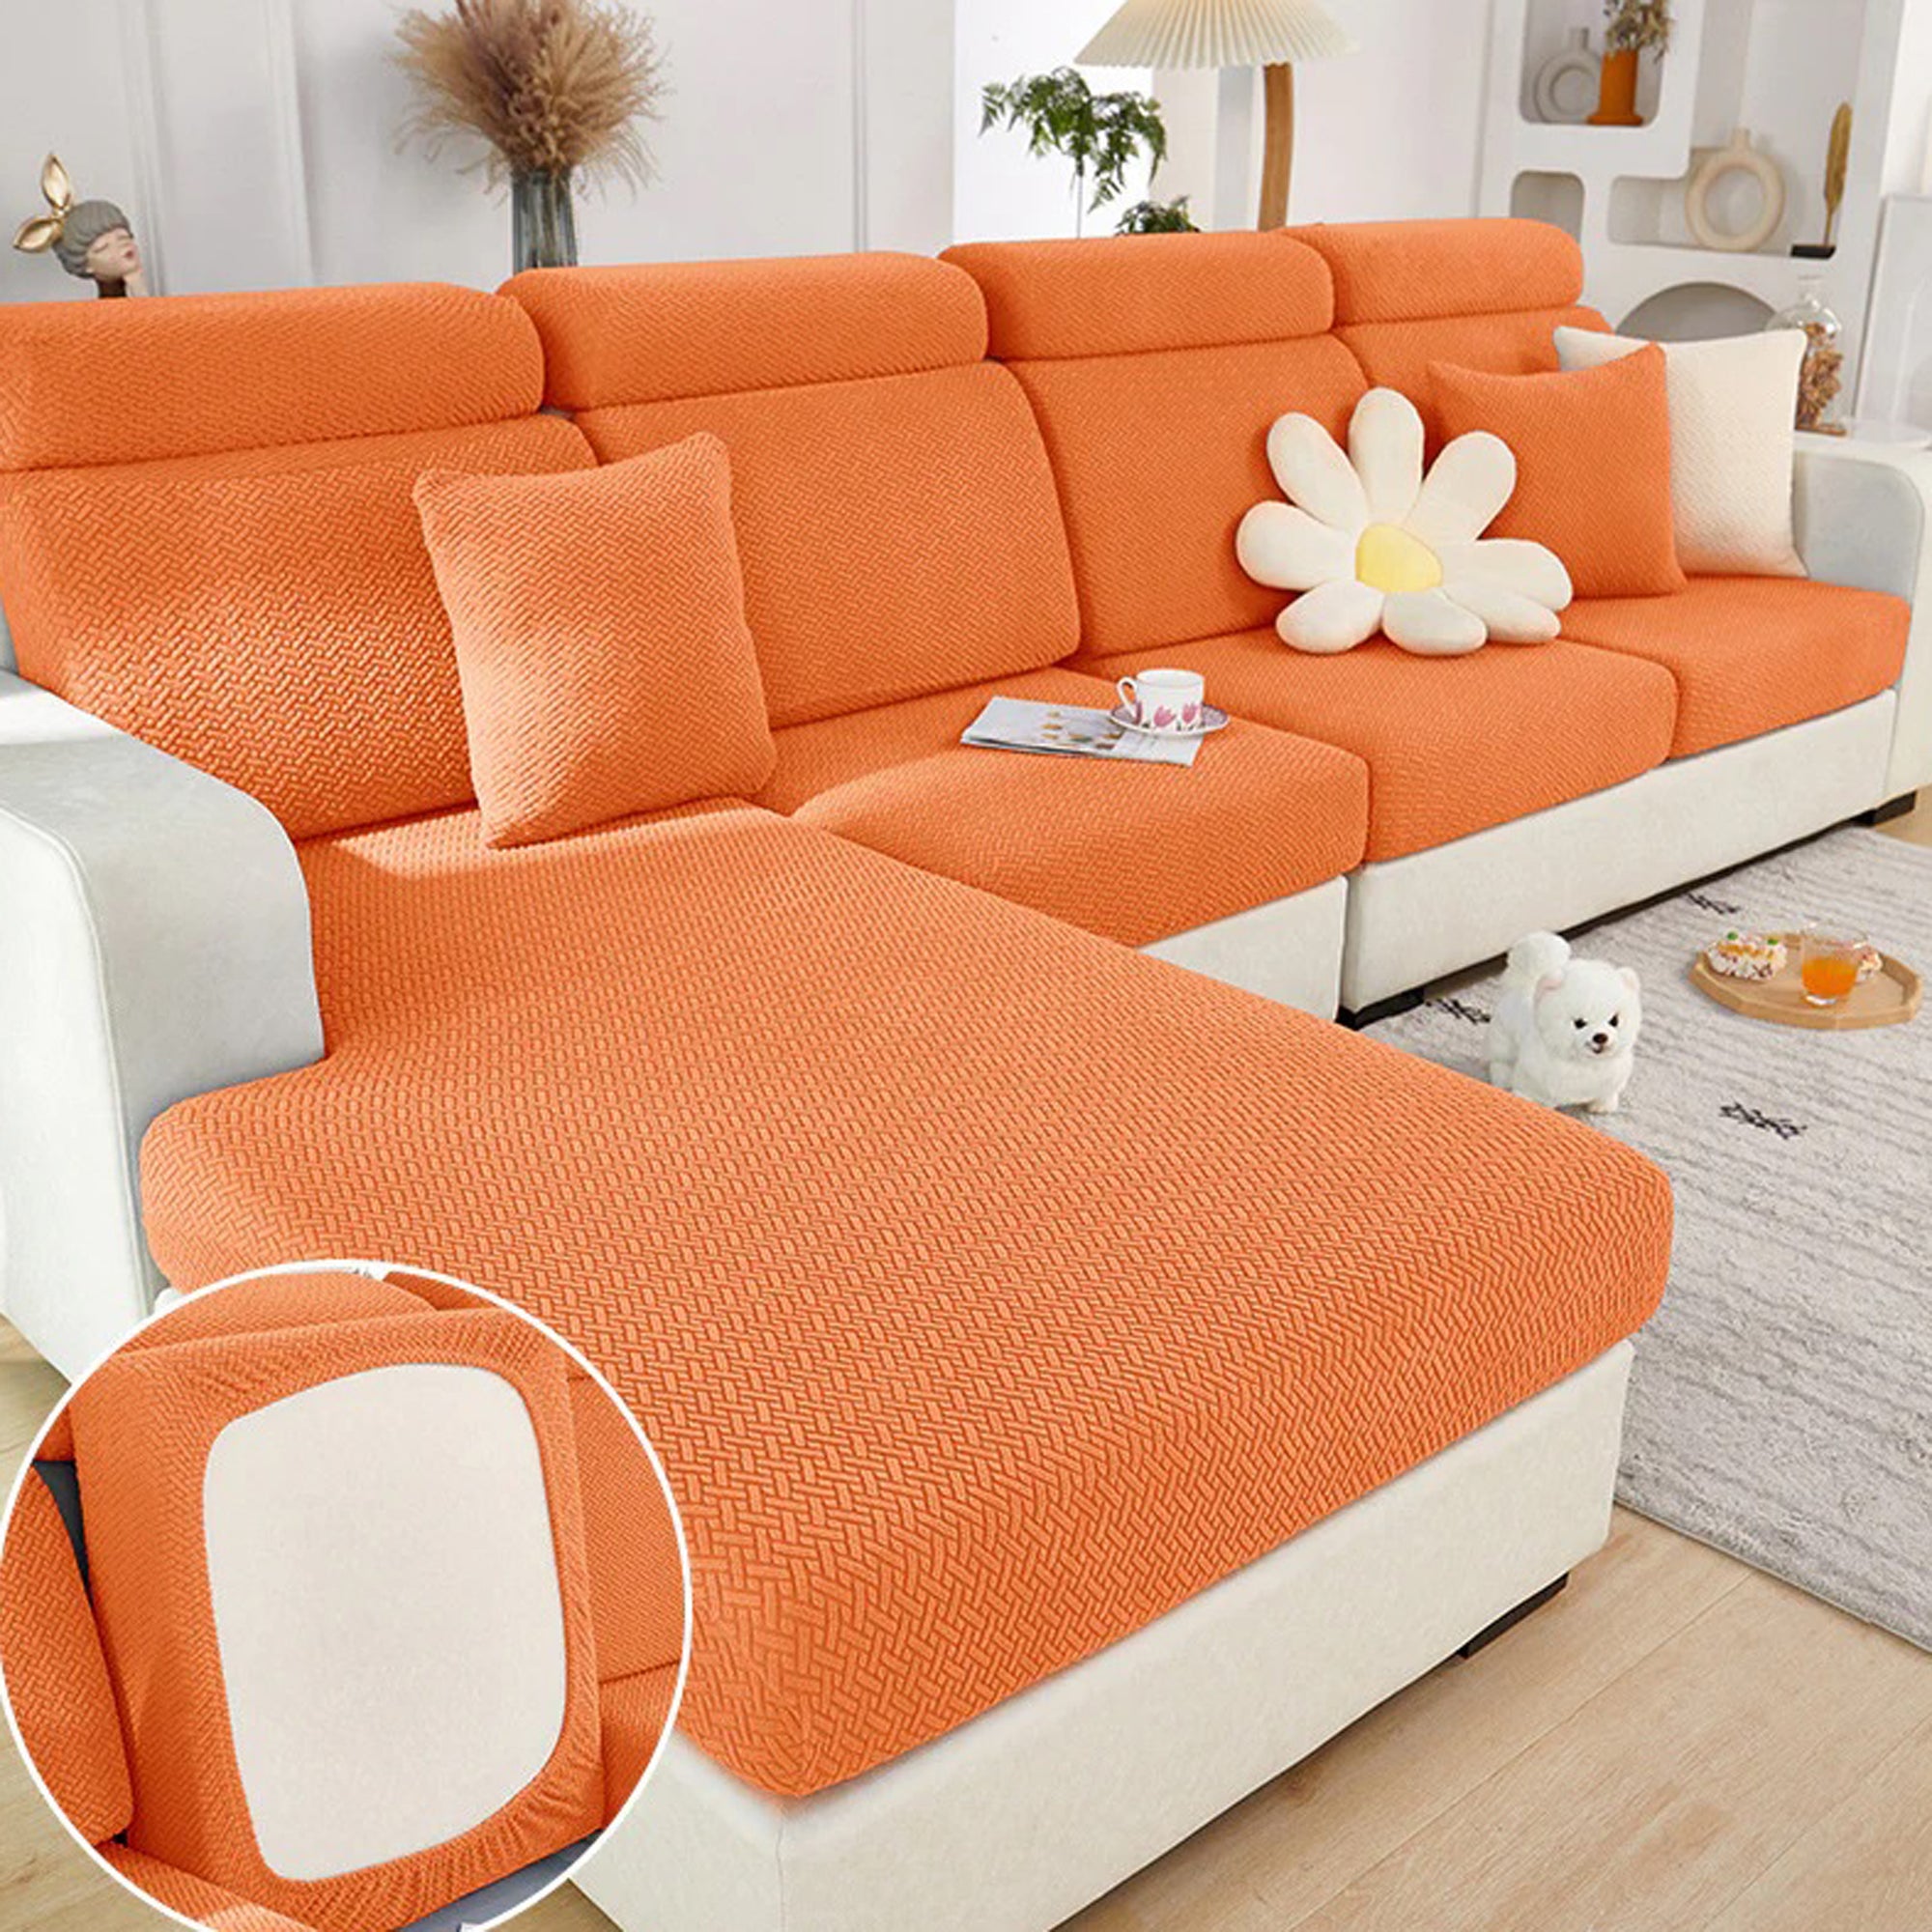 Sofa Cover Patterns: How to Match Your Room Decor